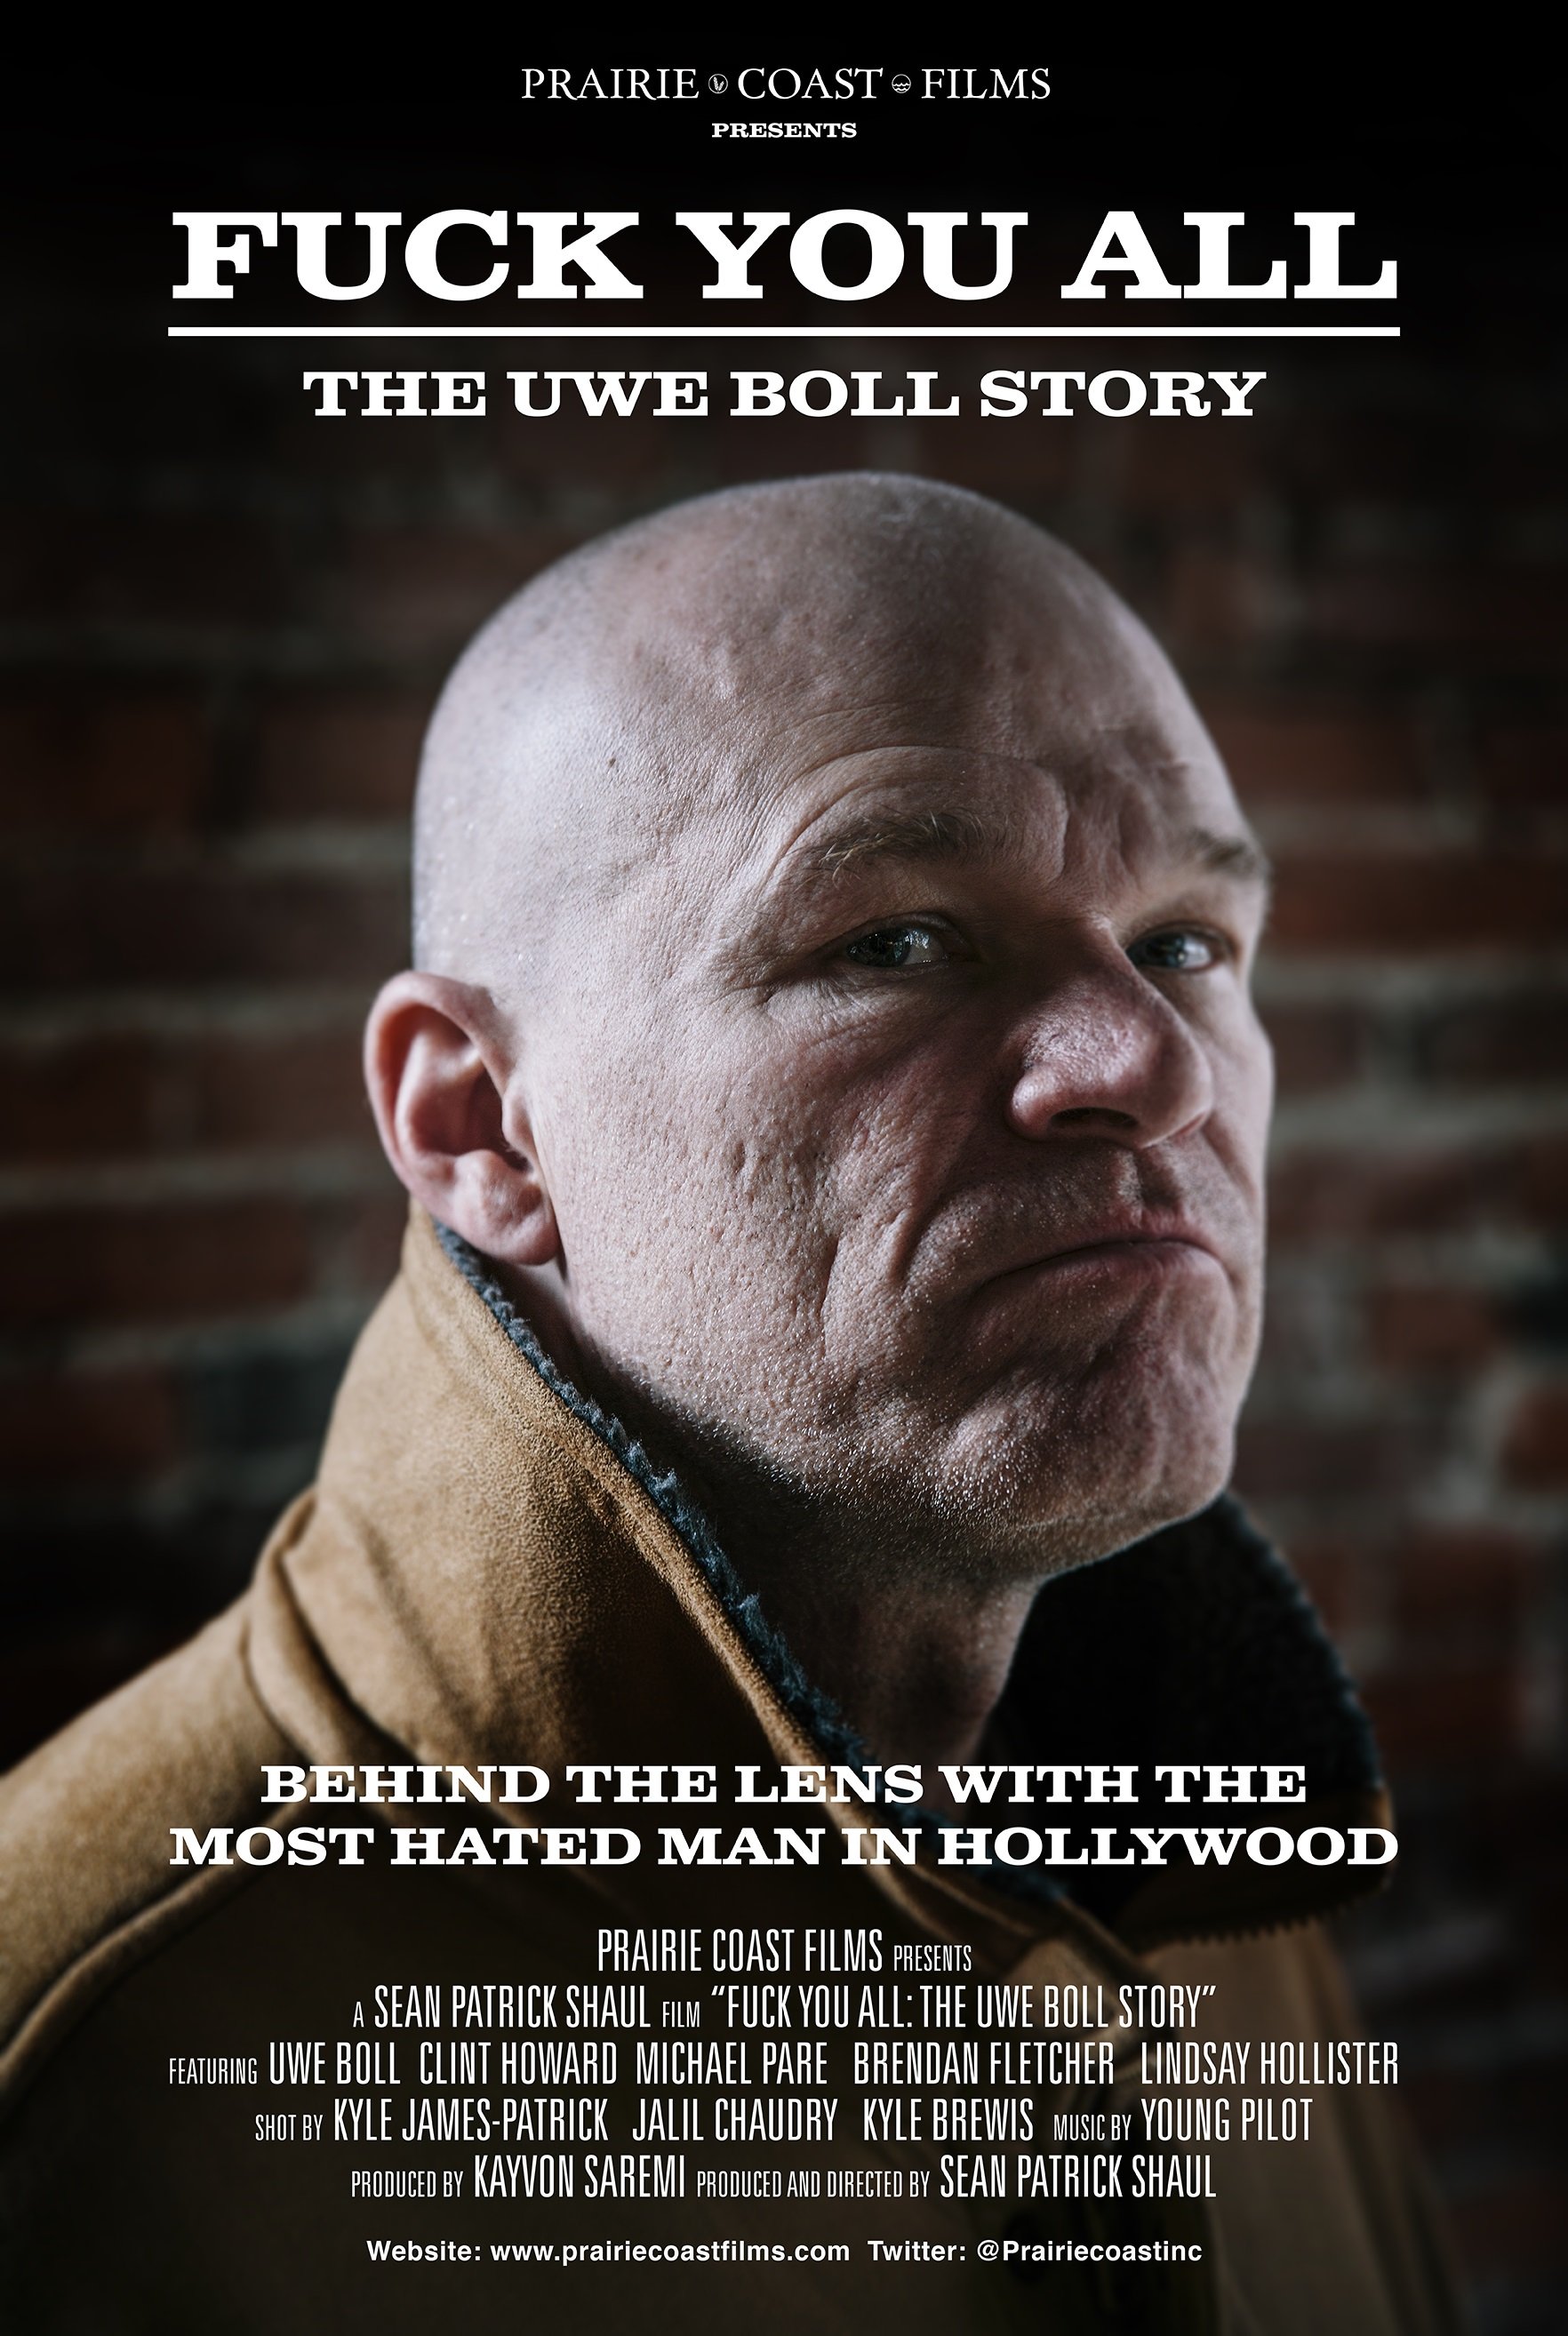 F*** You All: The Uwe Boll Story : Affiche